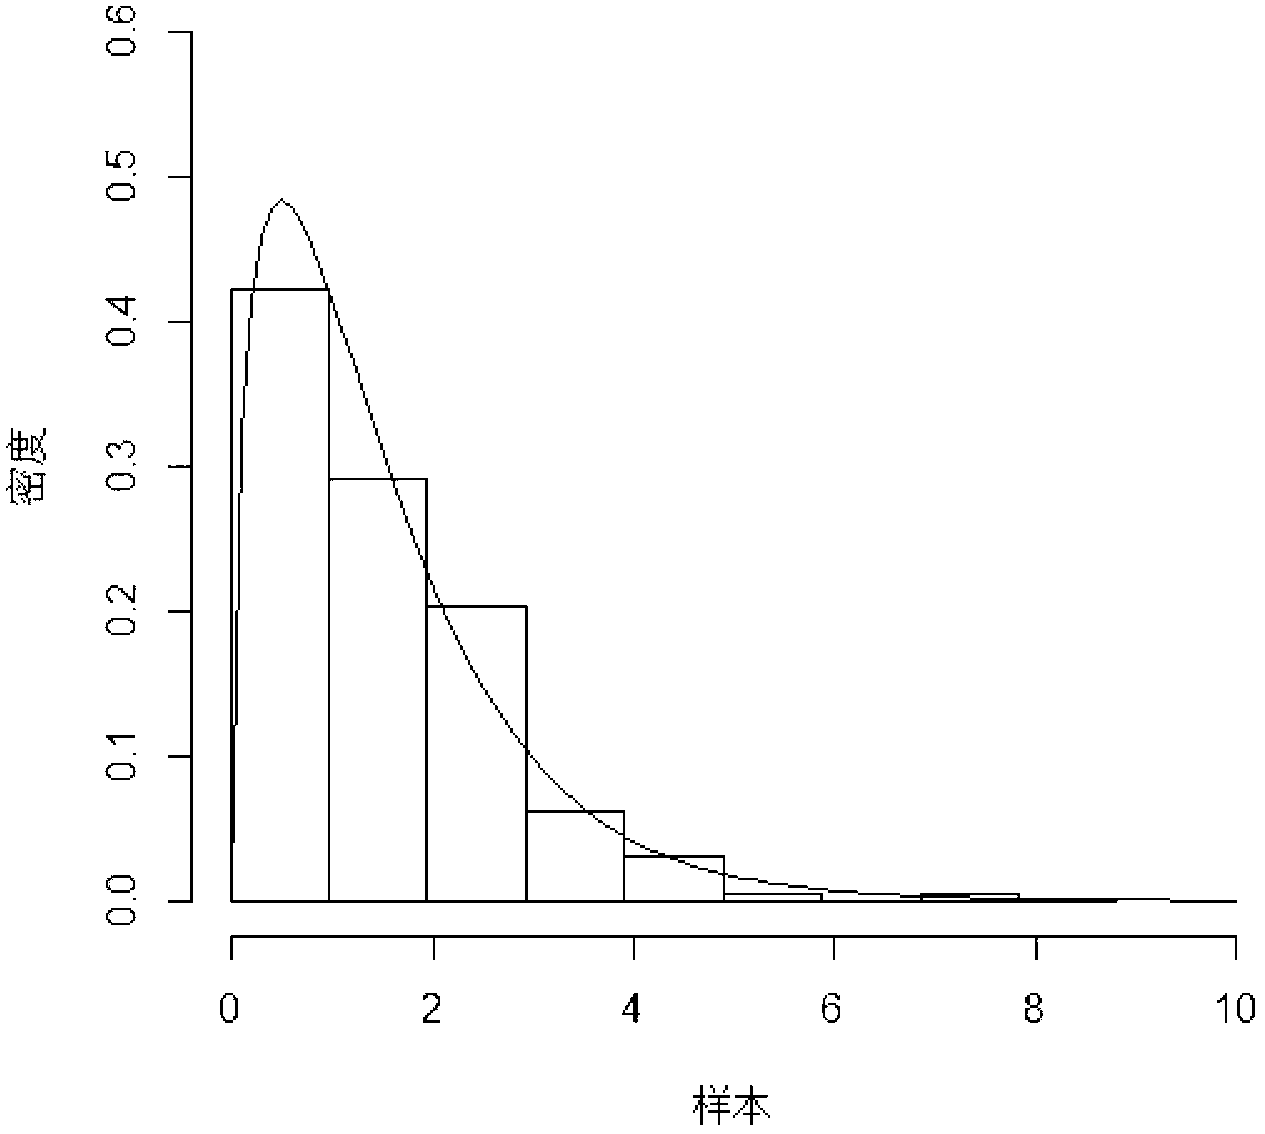 Unequal class interval histogram rendering method based on empirical distribution function